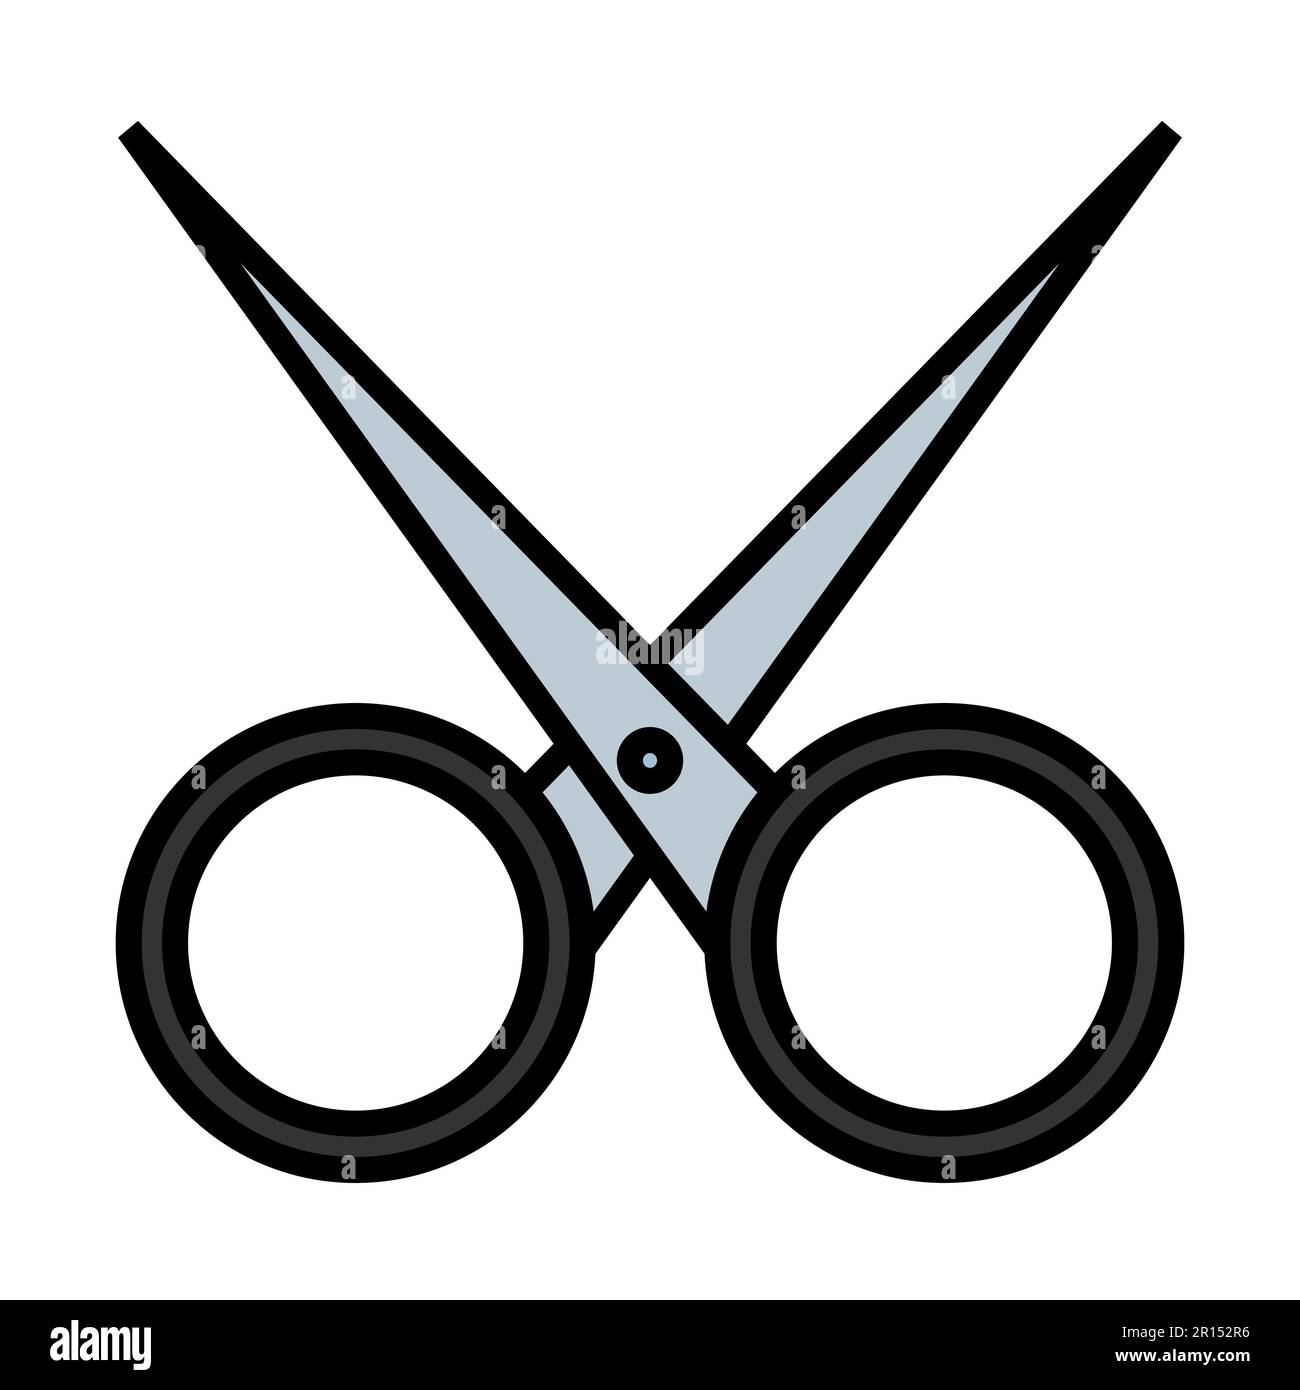 Flat black simple icon of trendy glamorous sharp metal hairdressing, nail scissors for cutting nails, doing hair and beauty guidance. Vector illustrat Stock Vector